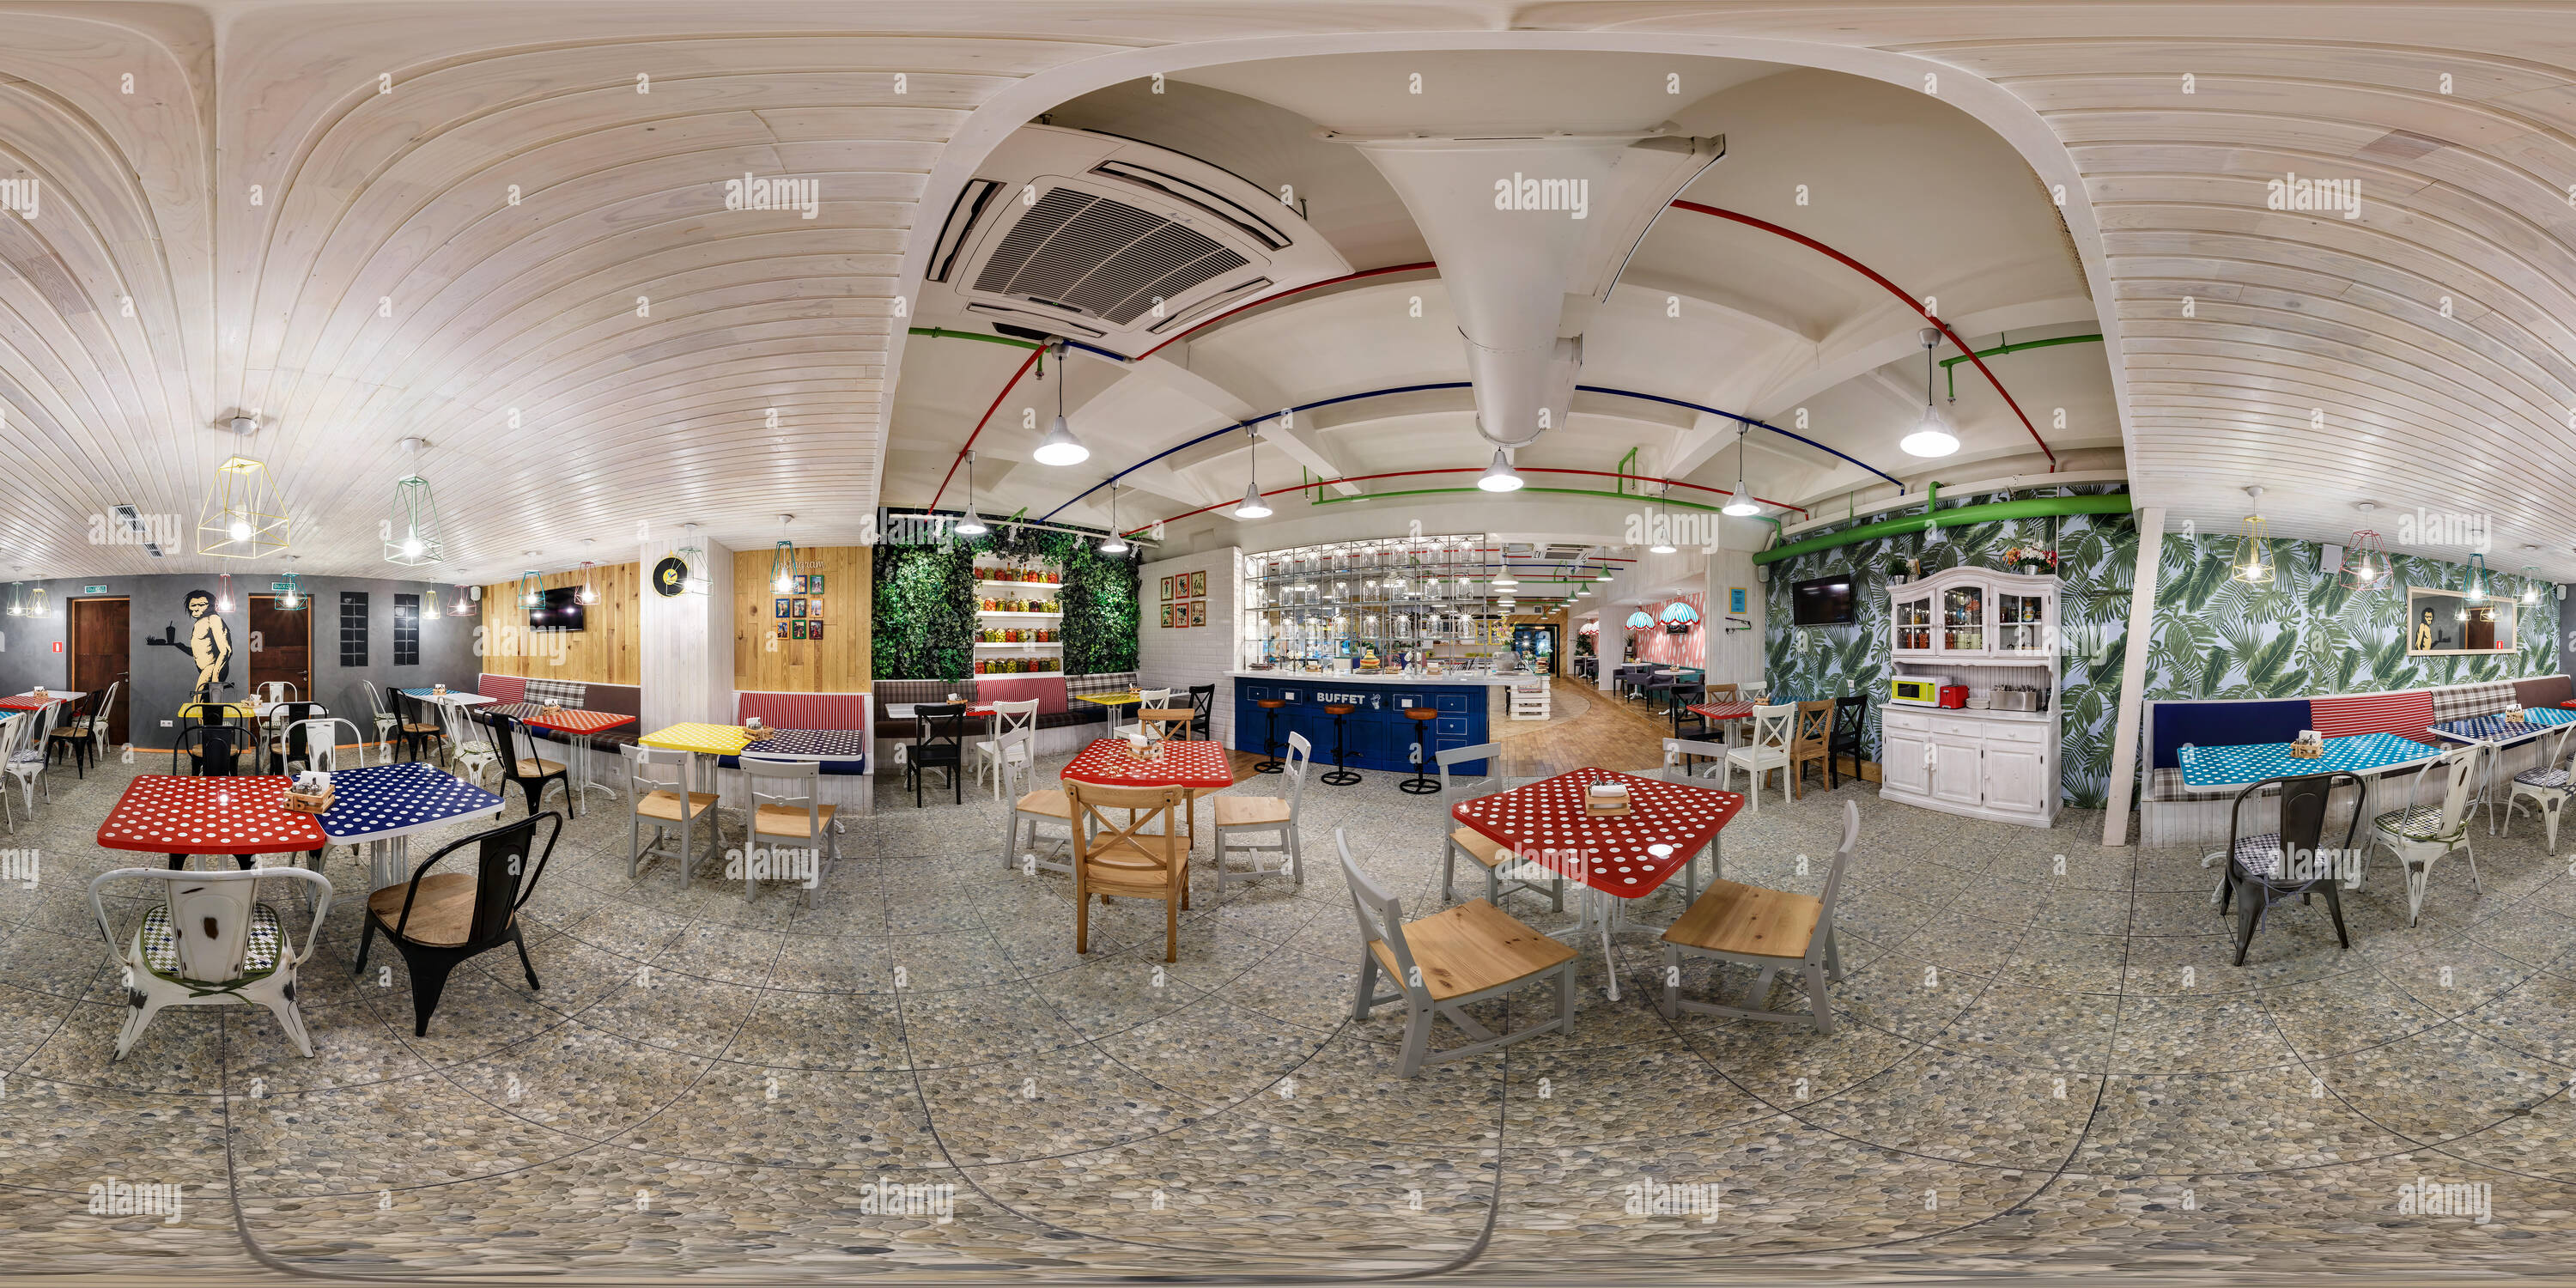 360 degree panoramic view of GRODNO, BELARUS - JANUARY 26, 2016: Full spherical 360 by 180 degrees seamless panorama in equirectangular equidistant projection, panorama in interio